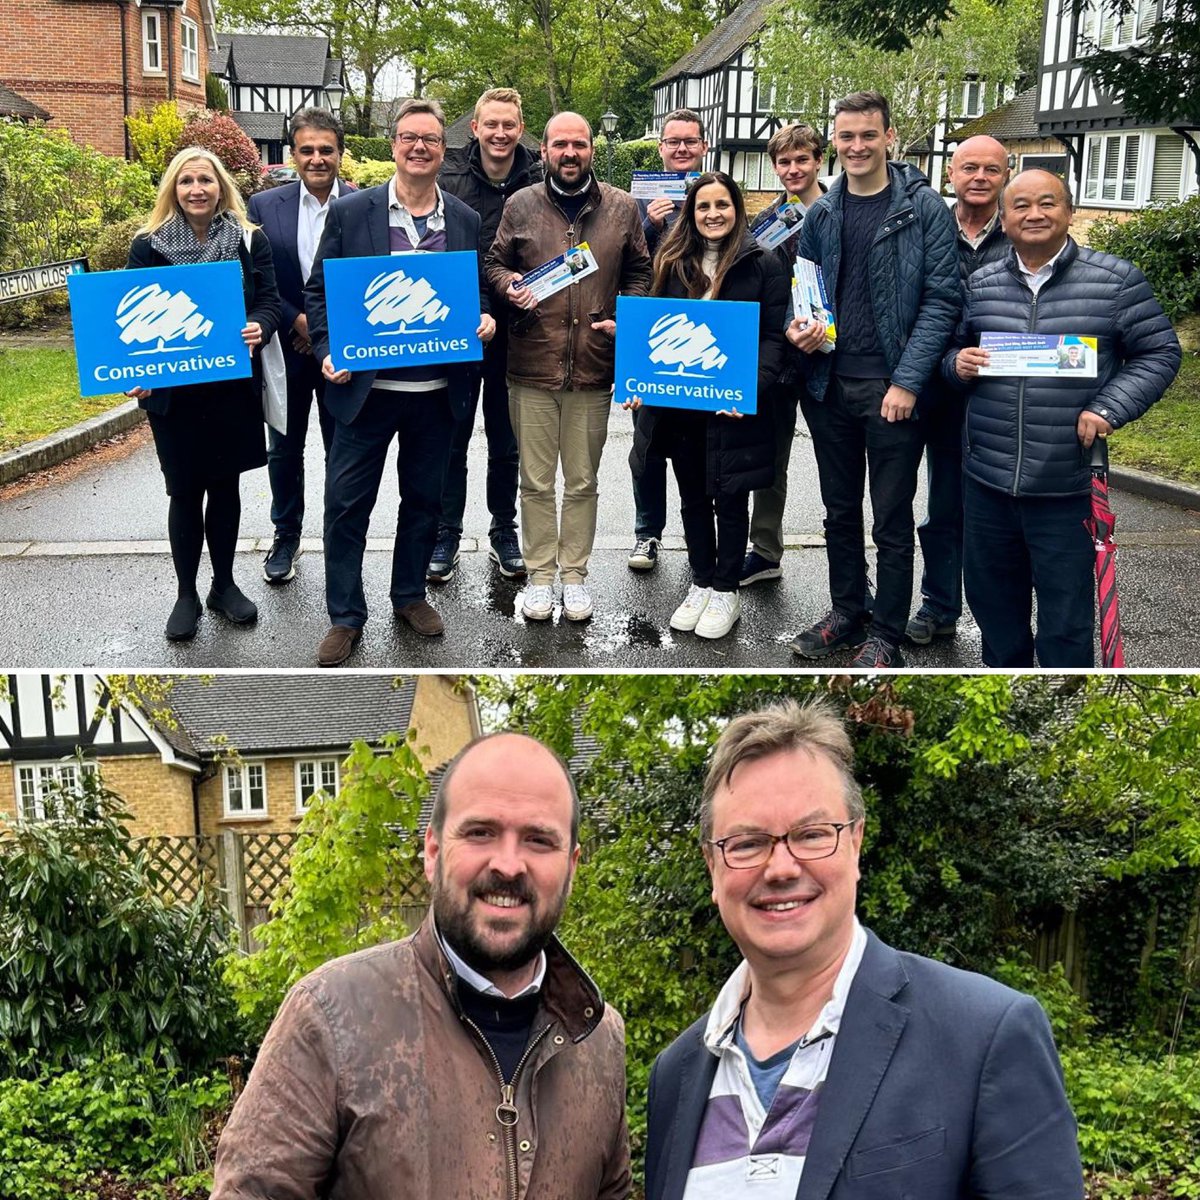 In West Byfleet this afternoon with @JonathanLord in support of @joshbrownuk ahead of the #LocalElections this Thursday, May 2 Josh has been an excellent Councillor since being elected in 2021; voting against increases in council tax, standing up against aggressive over-…